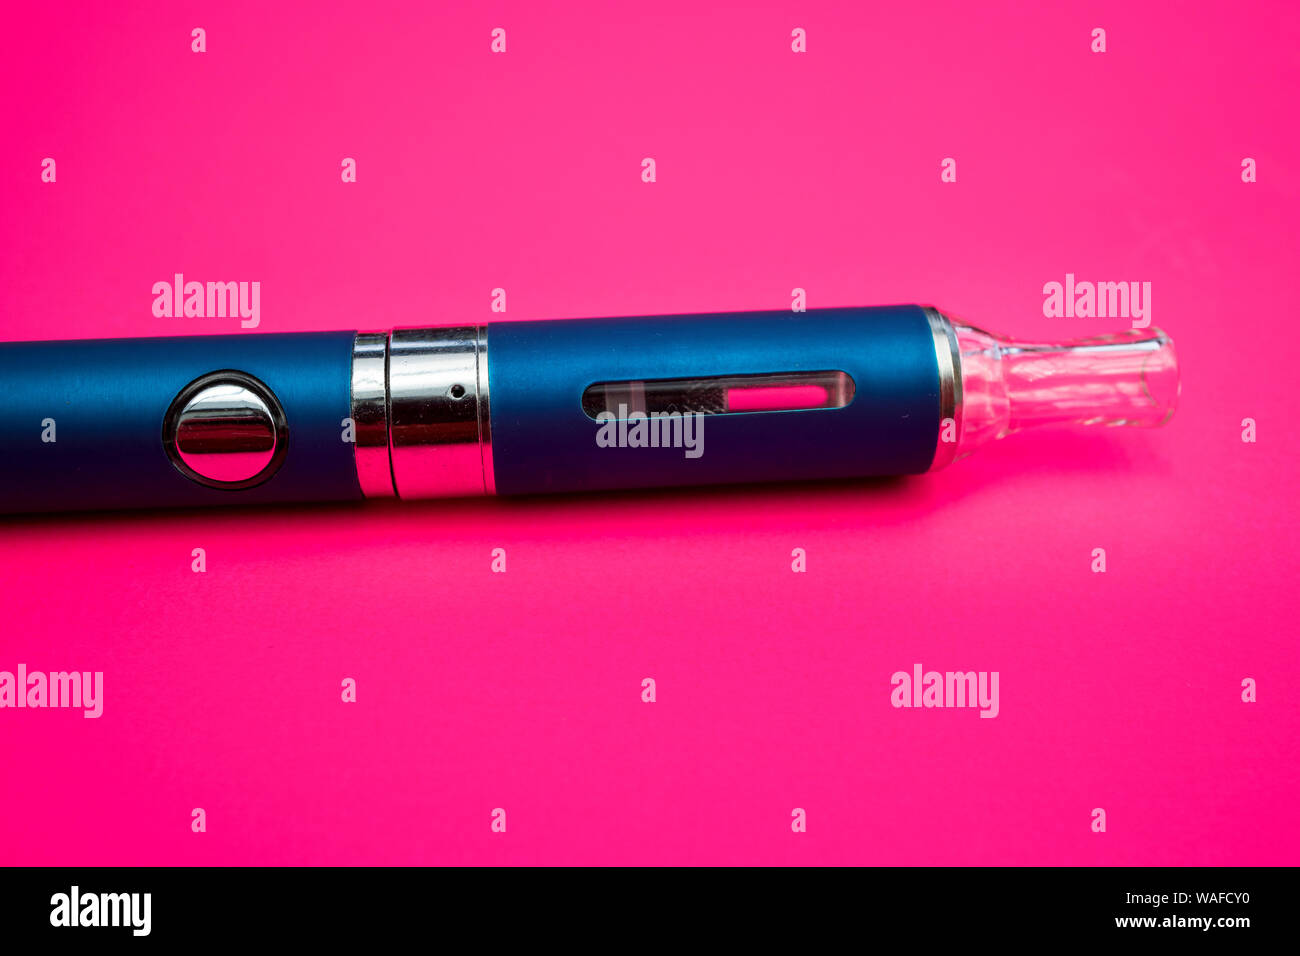 Vape pen metal electronic cigarette with vaping pink background Stock Photo